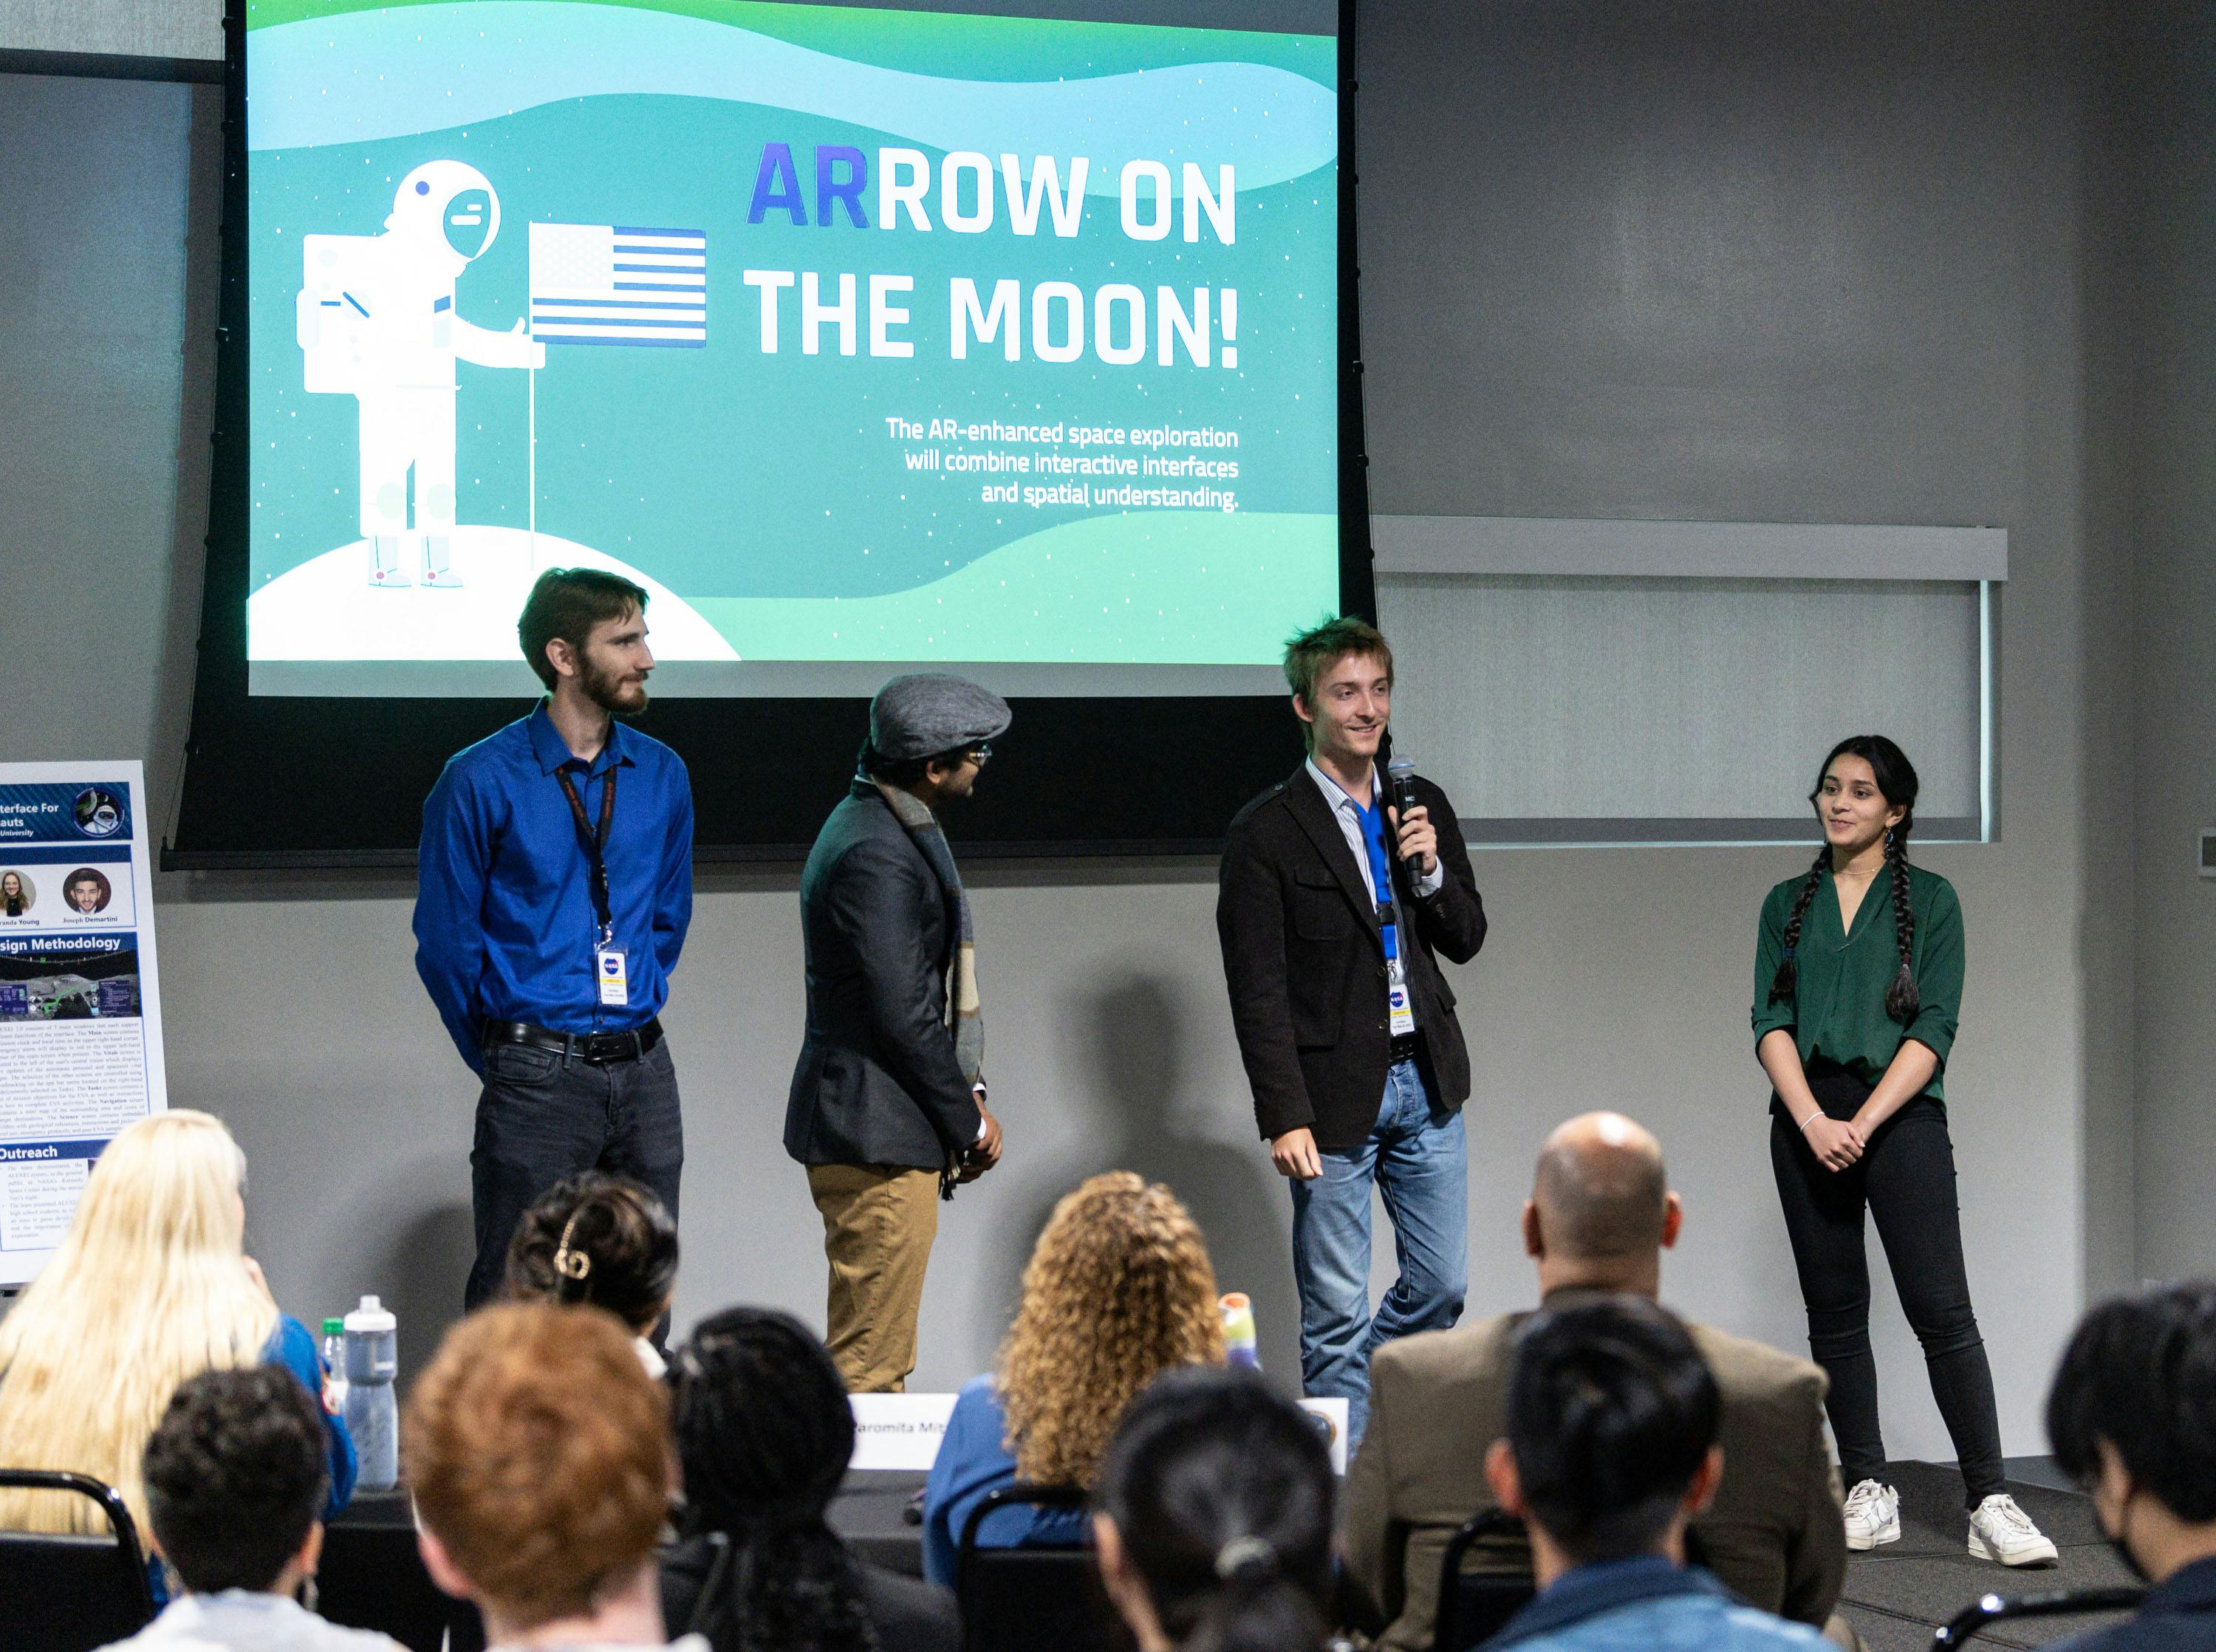 A young man holds a microphone alongside three peers on stage in front of an auditorium audience. Behind them is a slide that reads "ARROW on the Moon: The AR-enhanced space exploration will combine interactive interfaces and spatial understanding"